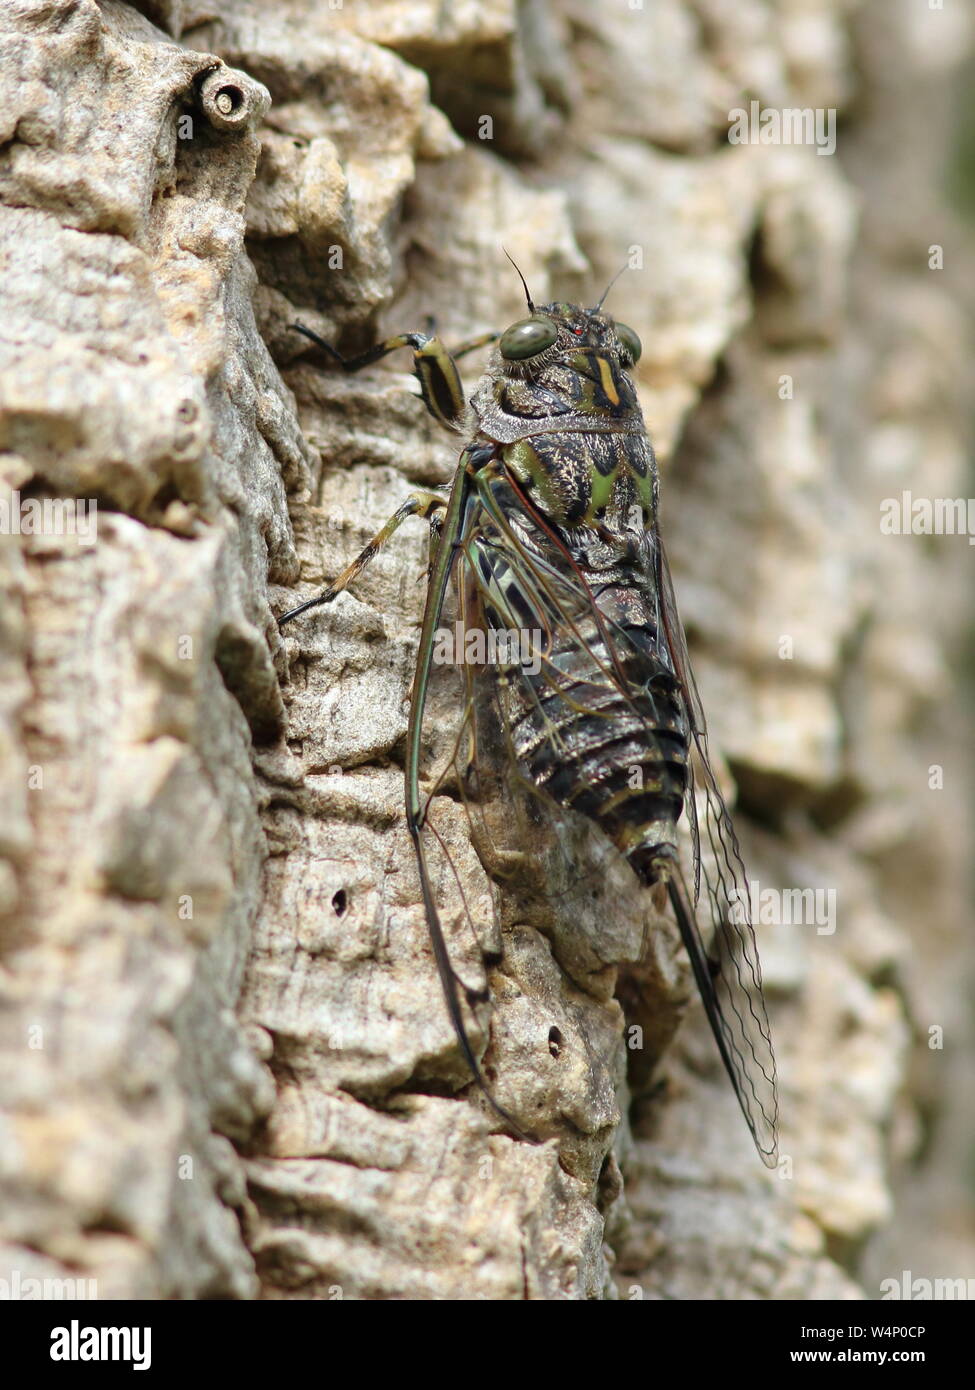 Amphipsalta zelandica, Chorus cicadas, this endemic insect is at rest on tree bark in New Zealand, a true bug, feeds on xylem. Stock Photo